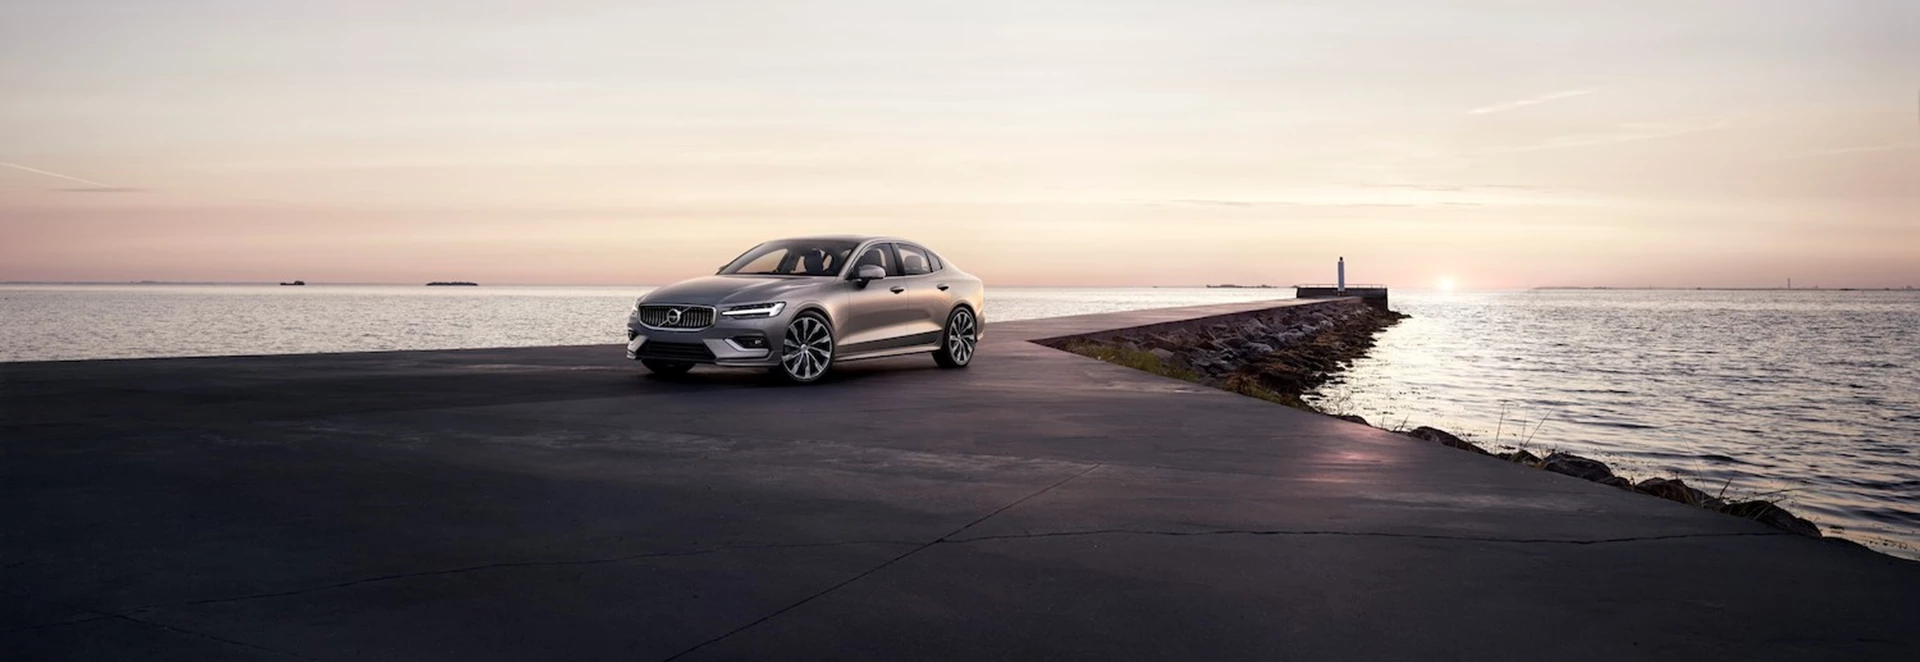 2019 Volvo S60: Here's what we can expect